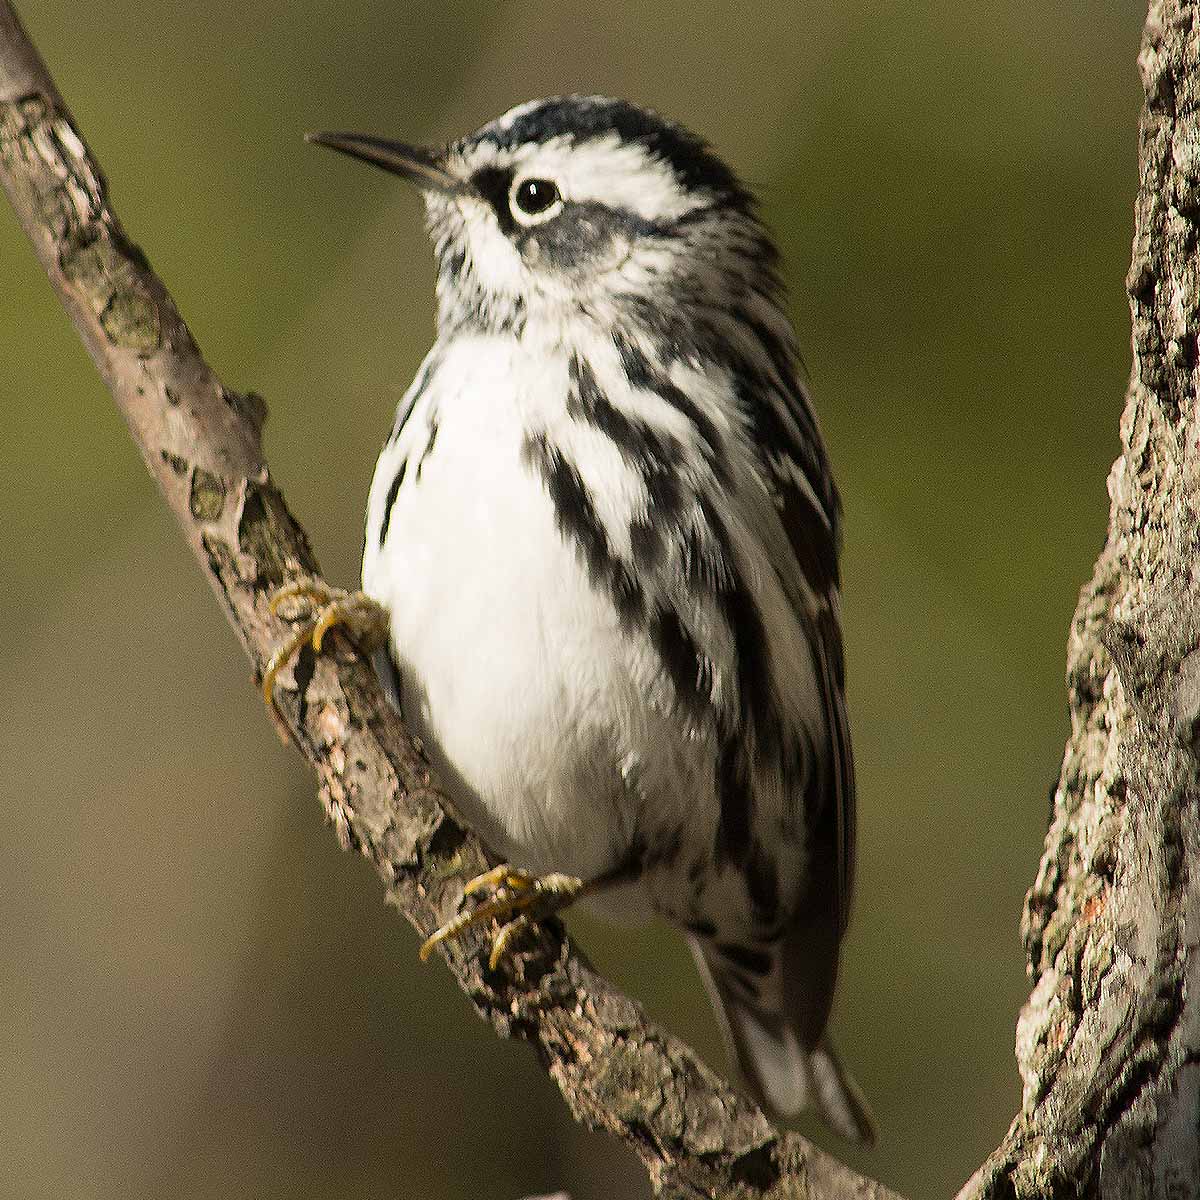 The image depicts a striking black and white warbler perched on a tree branch. The bird has a distinctive black and white striped pattern covering its entire body, starting from it's crown and extending along it's back, down to it's wings contrasting sharply with its white chest and underparts. Its small, pointed beak and alert expression suggest it is actively foraging or surveying its surroundings. The warbler's compact, streamlined shape and the blurred, out-of-focus greenery in the background indicate this is a close-up, detailed view of the bird in its natural woodland habitat. Black and white warblers are known for their unique monochromatic coloration and acrobatic movements as they search tree trunks and branches for insects, making them a visually captivating species for birdwatchers.